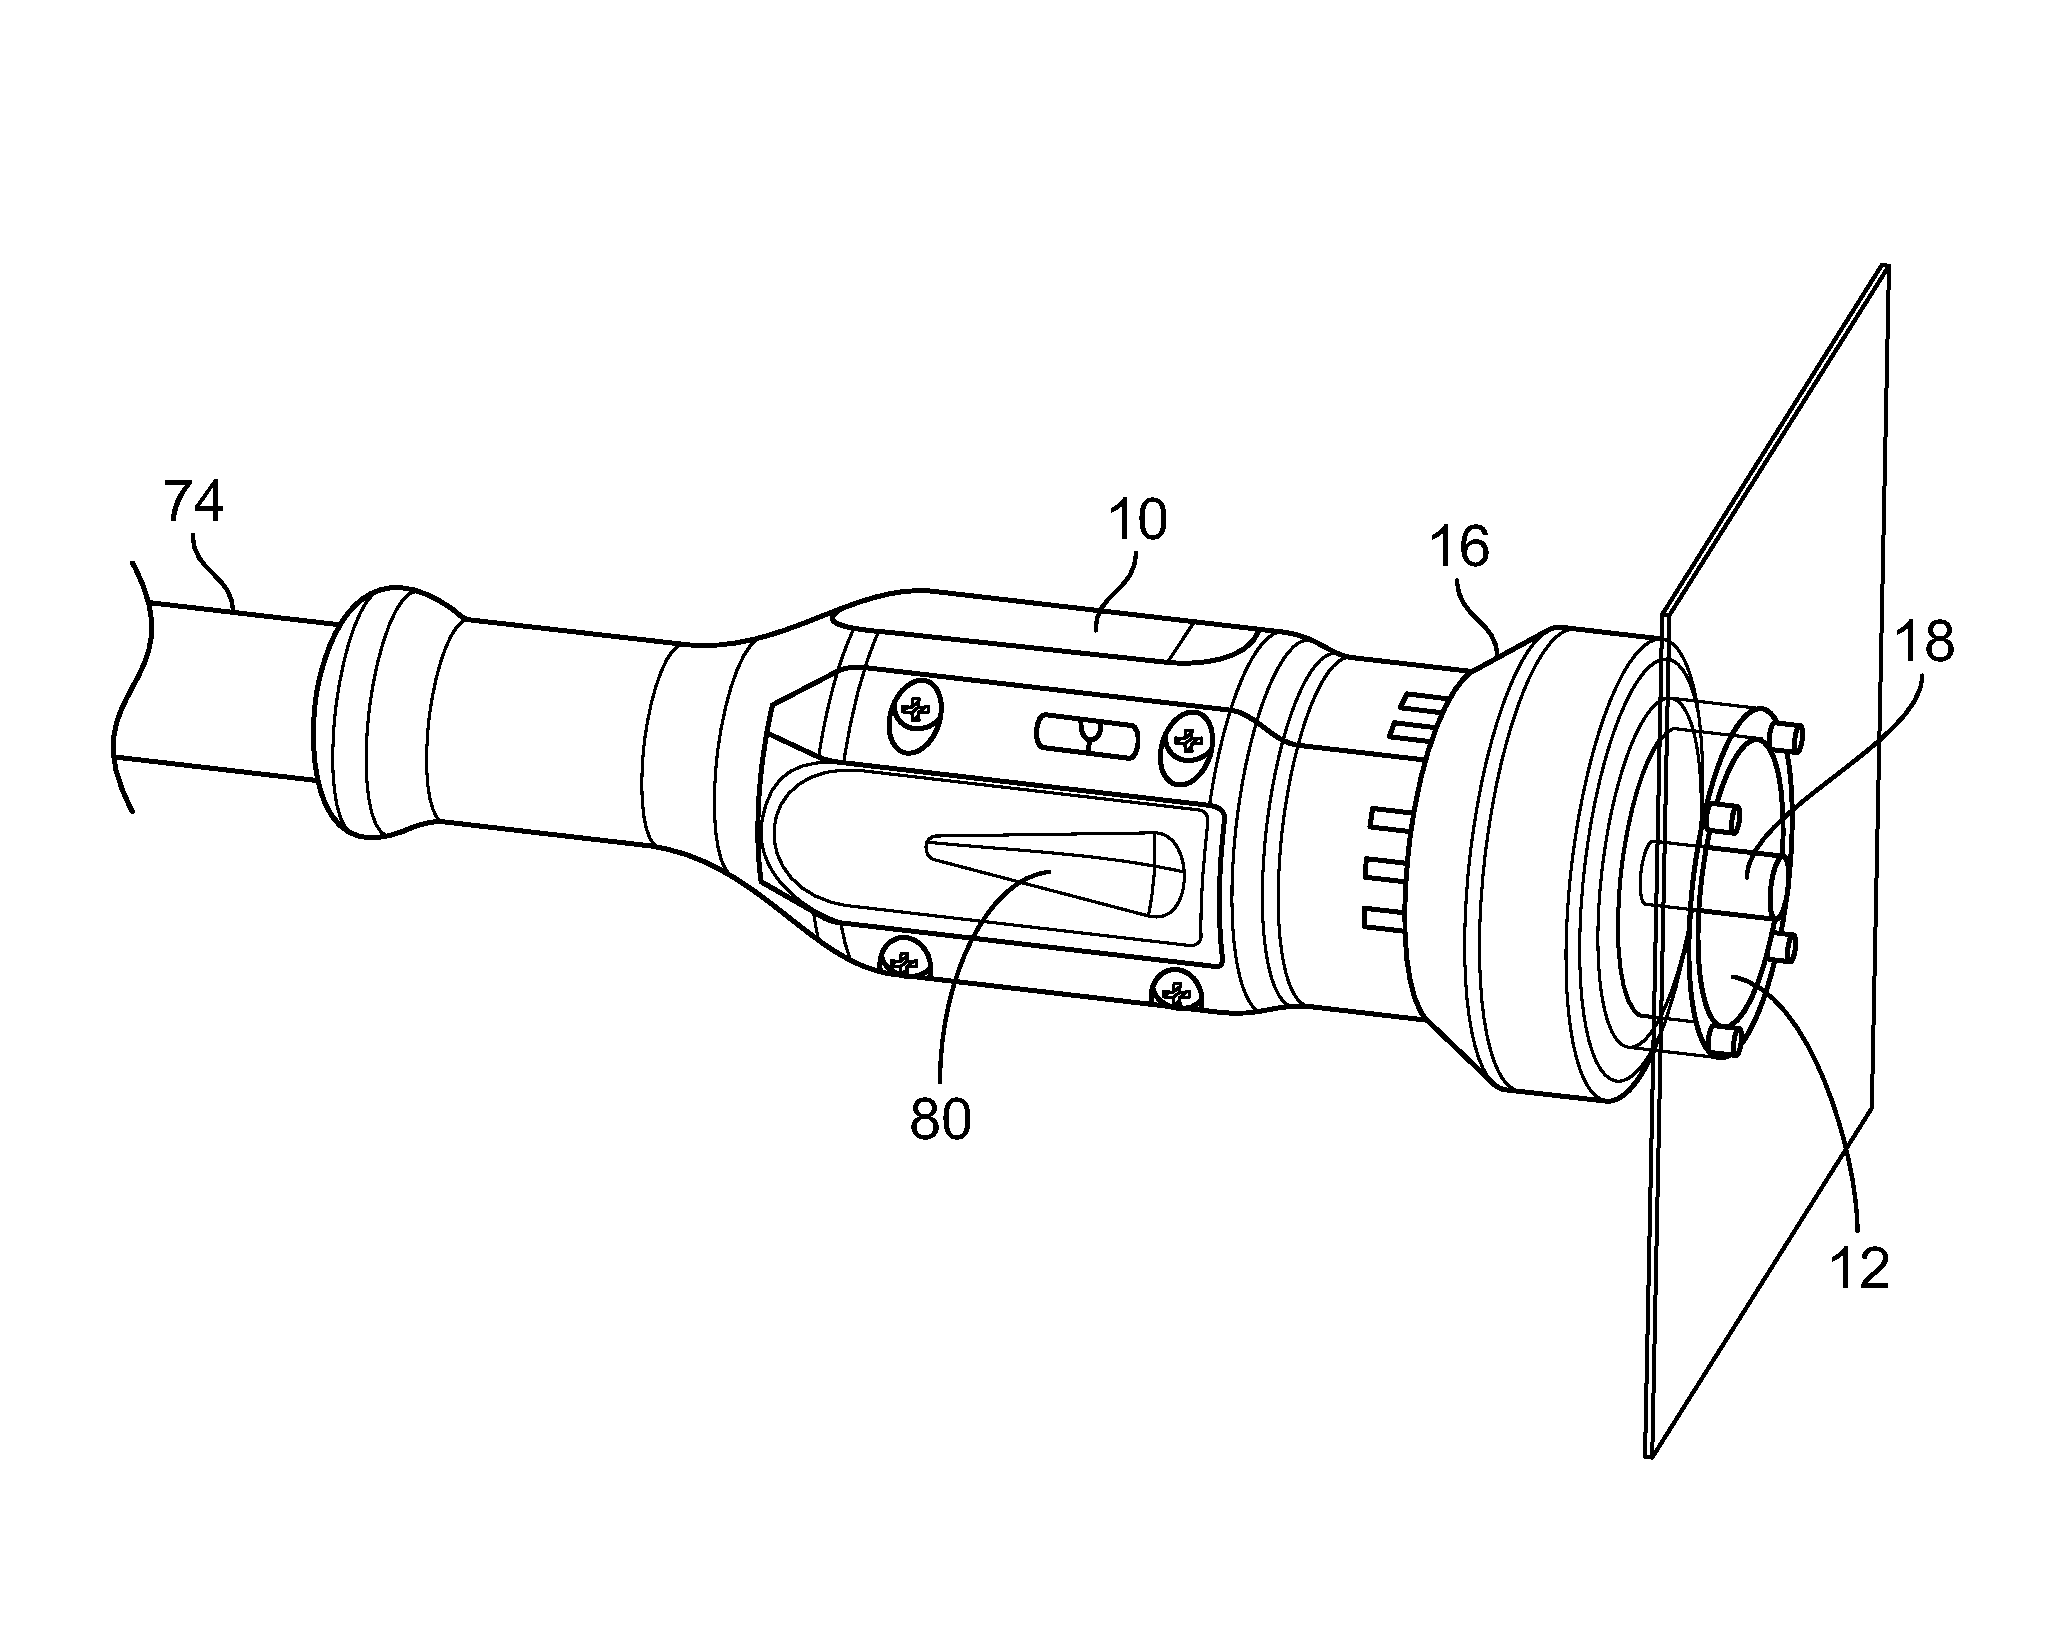 Device for targeted treatment of dermatoses